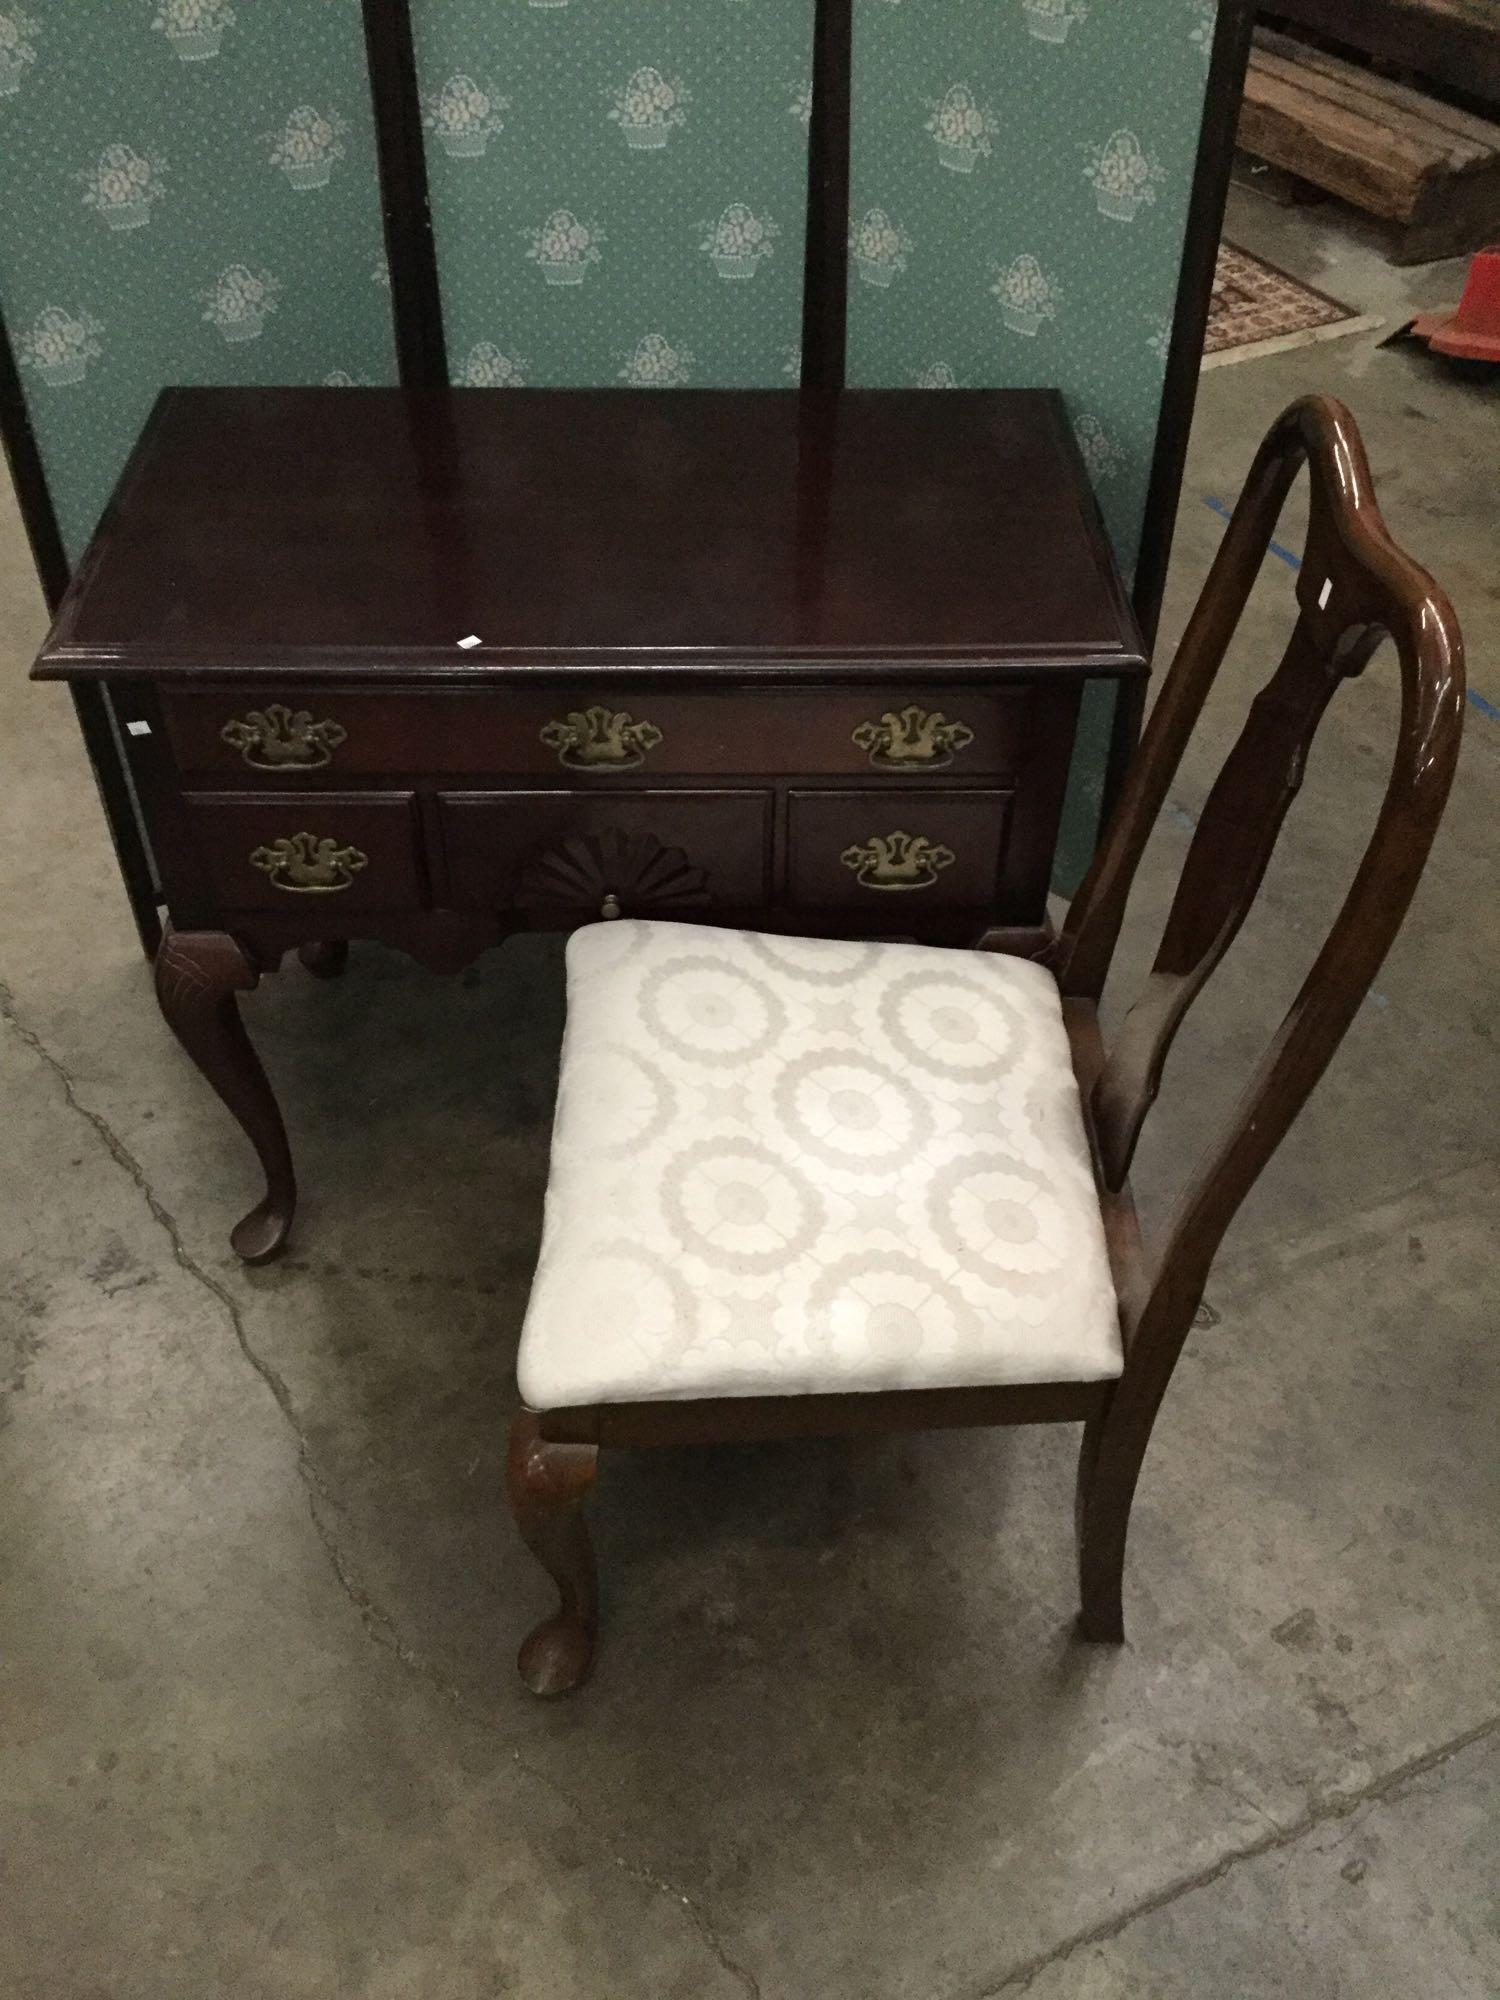 Vintage Mahogany hall dresser or entryway desk with chair - clamshell design and brass pulls